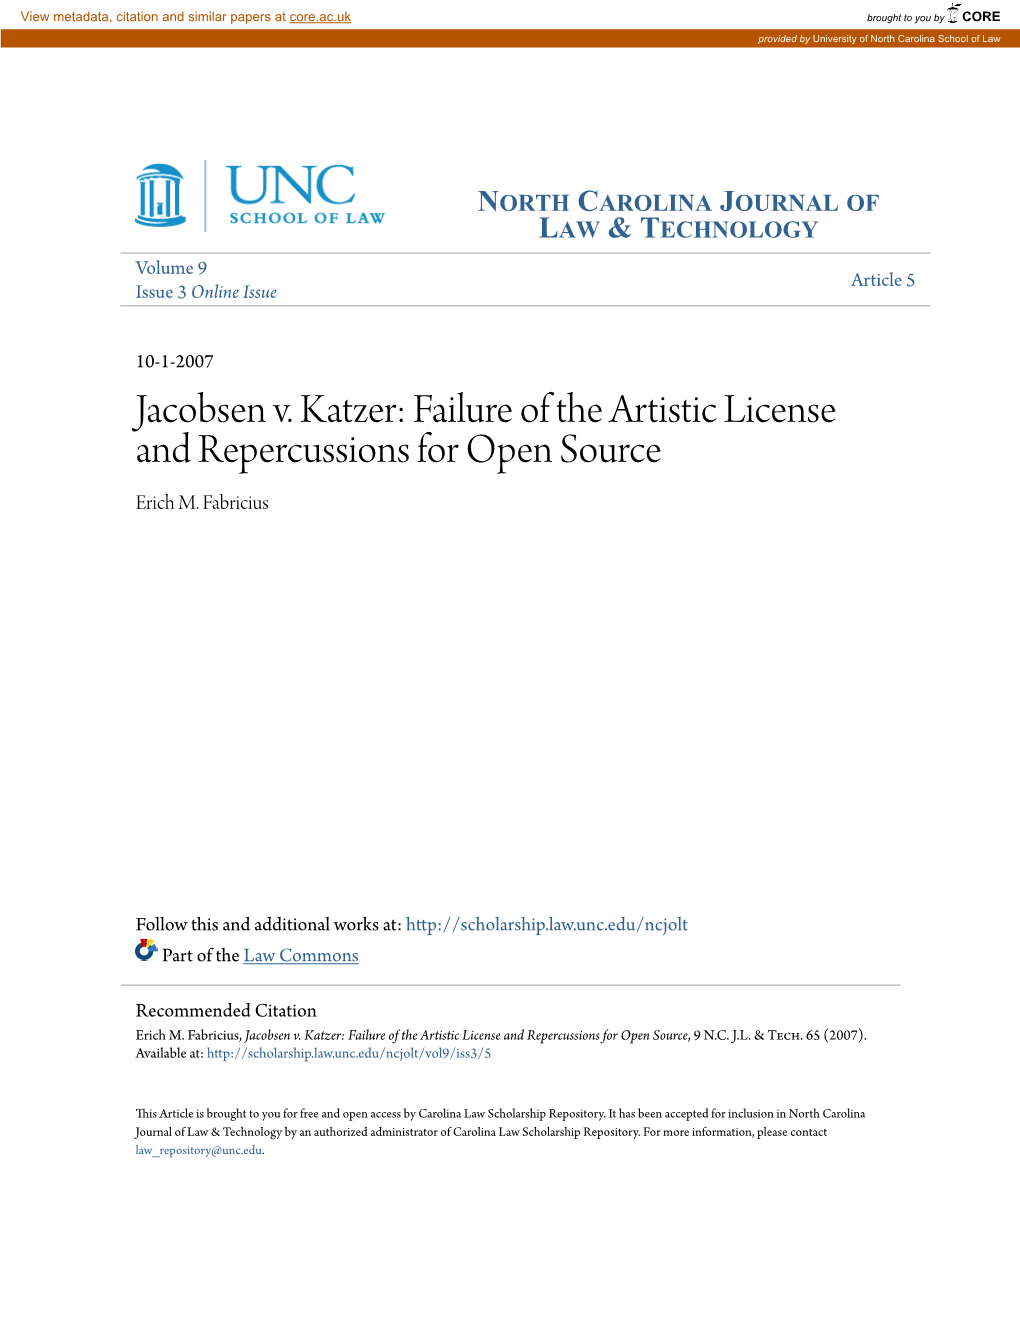 Jacobsen V. Katzer: Failure of the Artistic License and Repercussions for Open Source Erich M